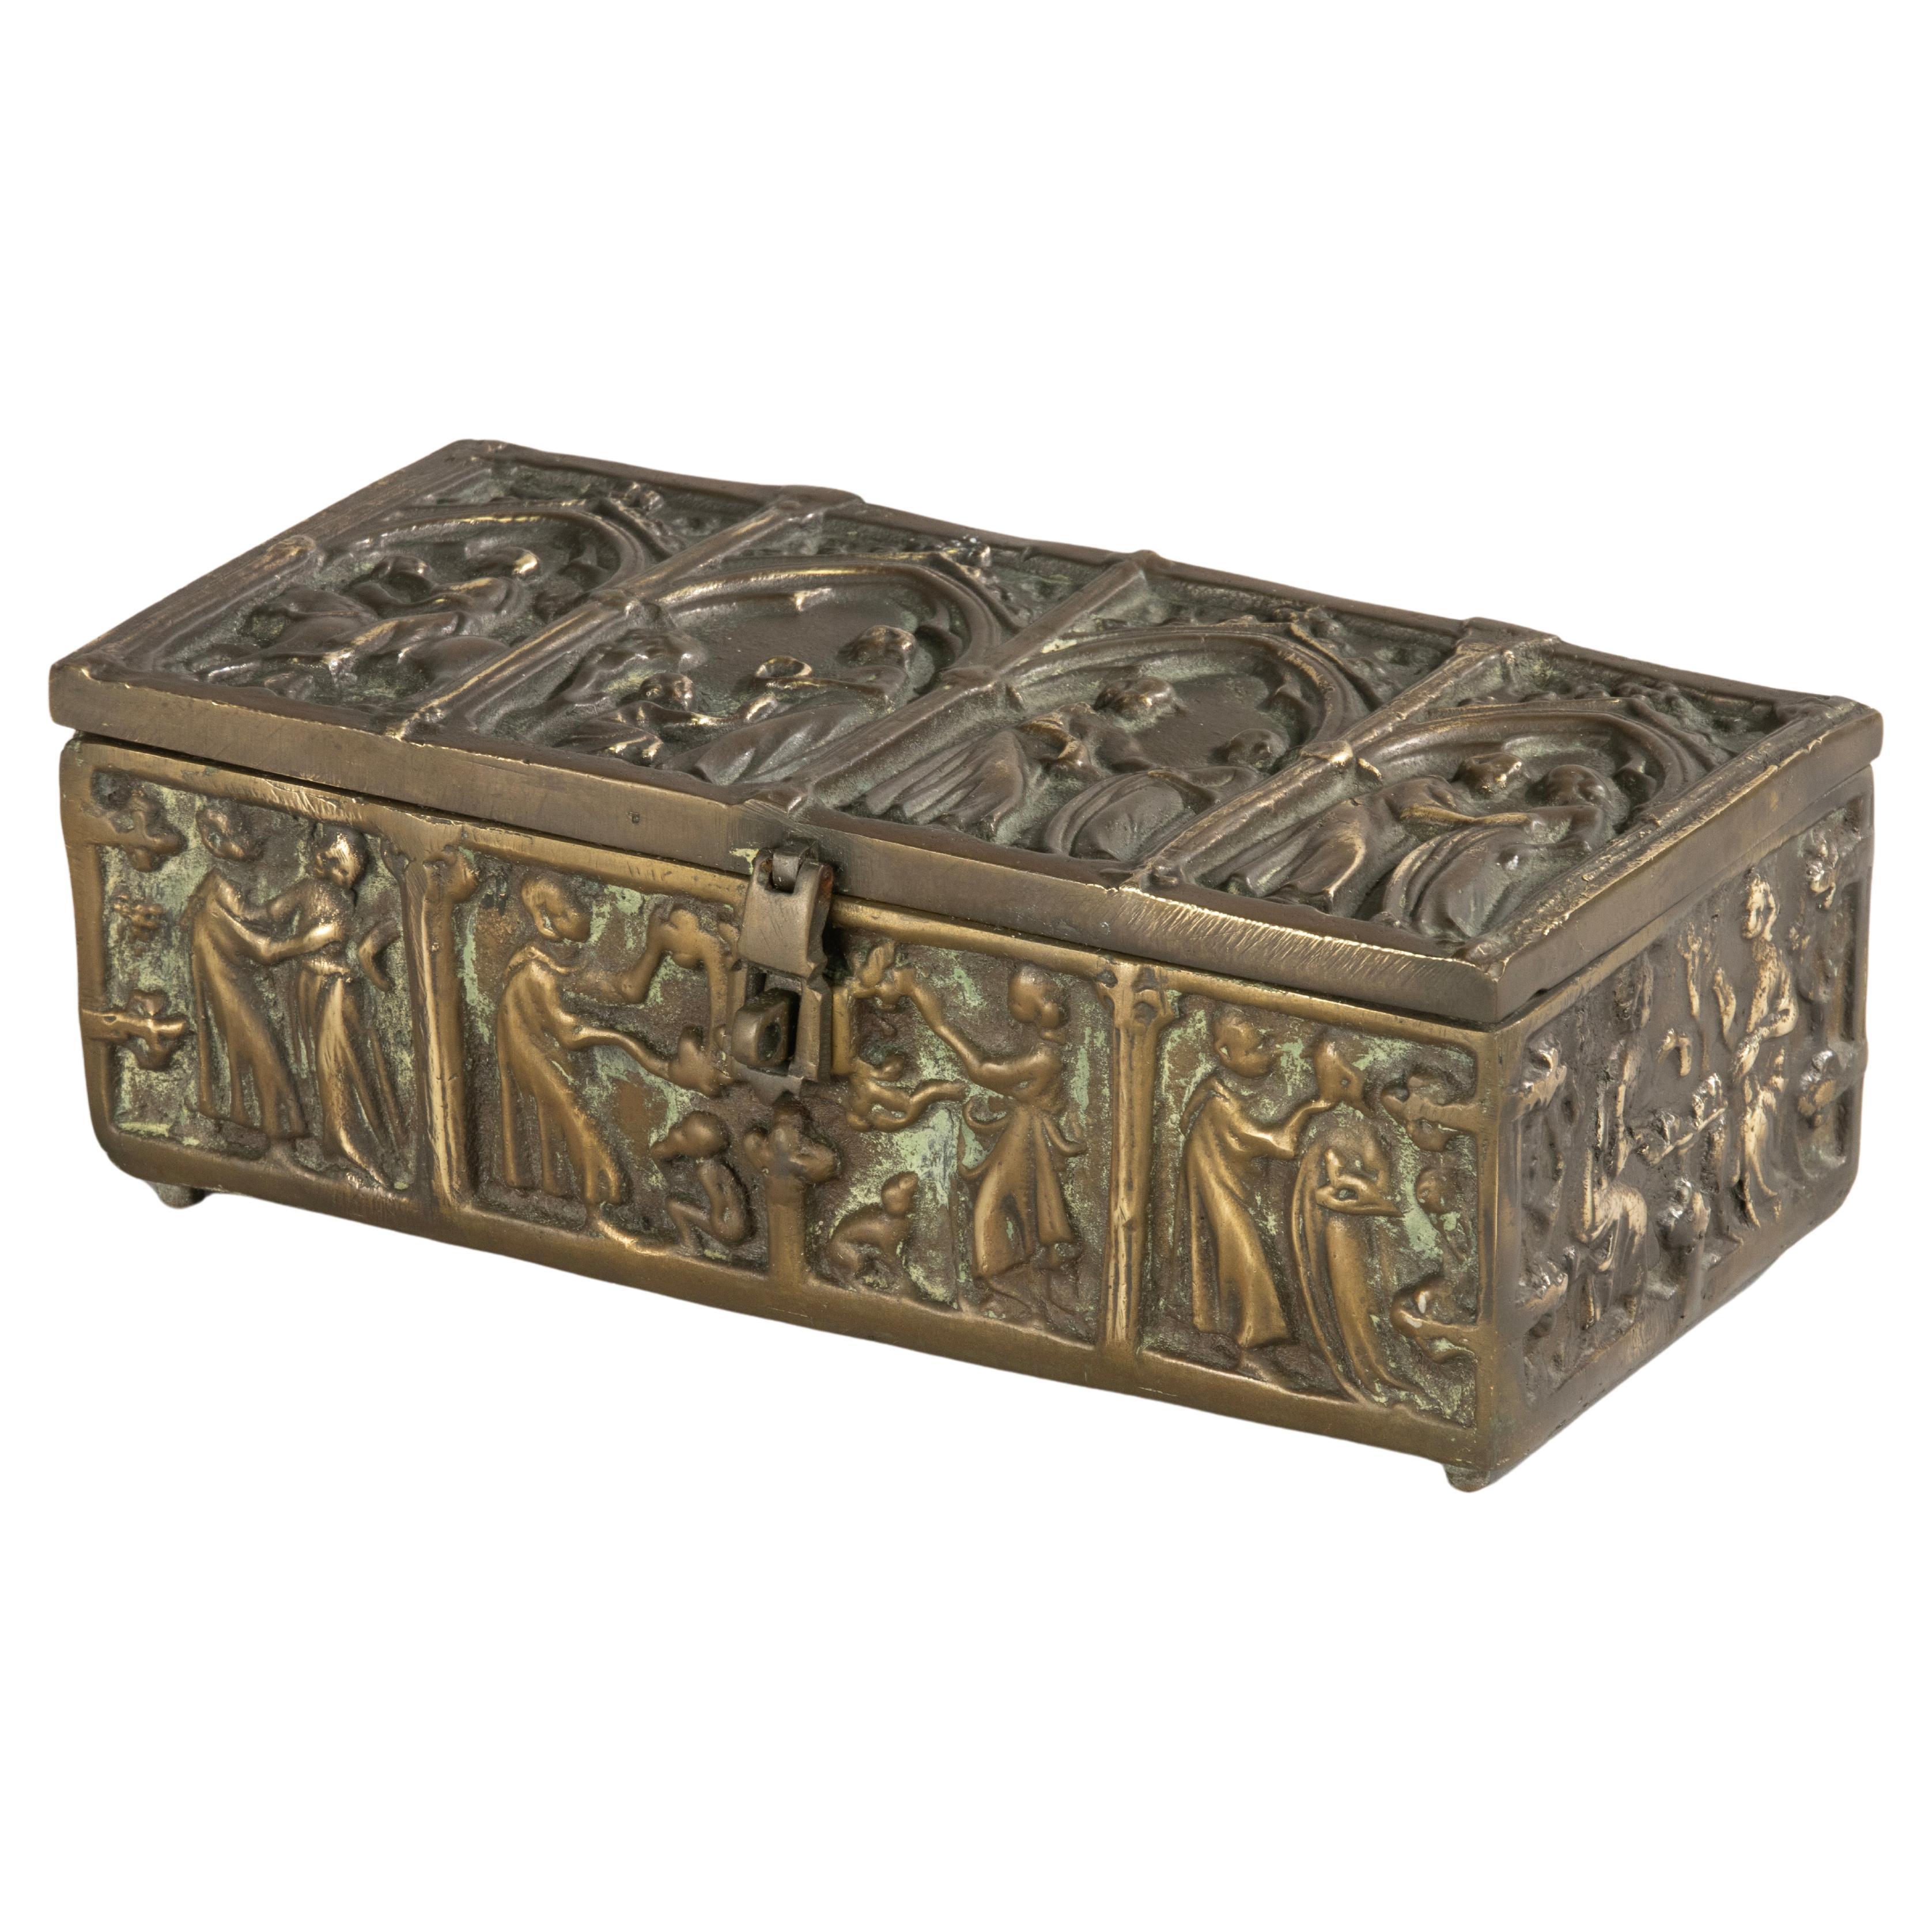 Antique Brass Decorative Box - Gothic Style For Sale